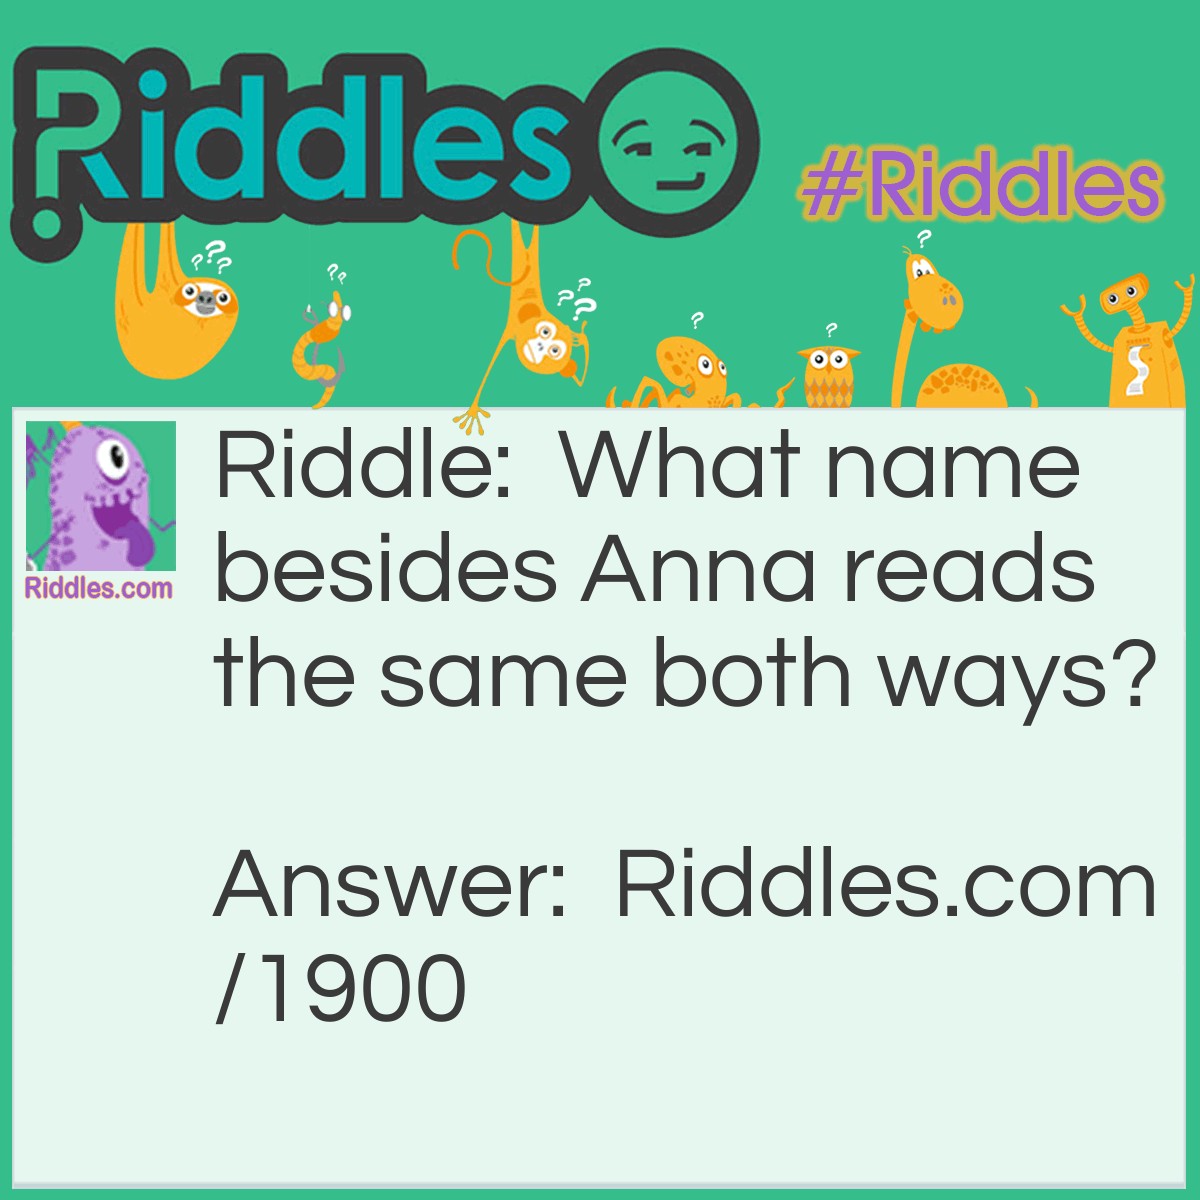 Riddle: What name besides Anna reads the same both ways? Answer: Hannah.